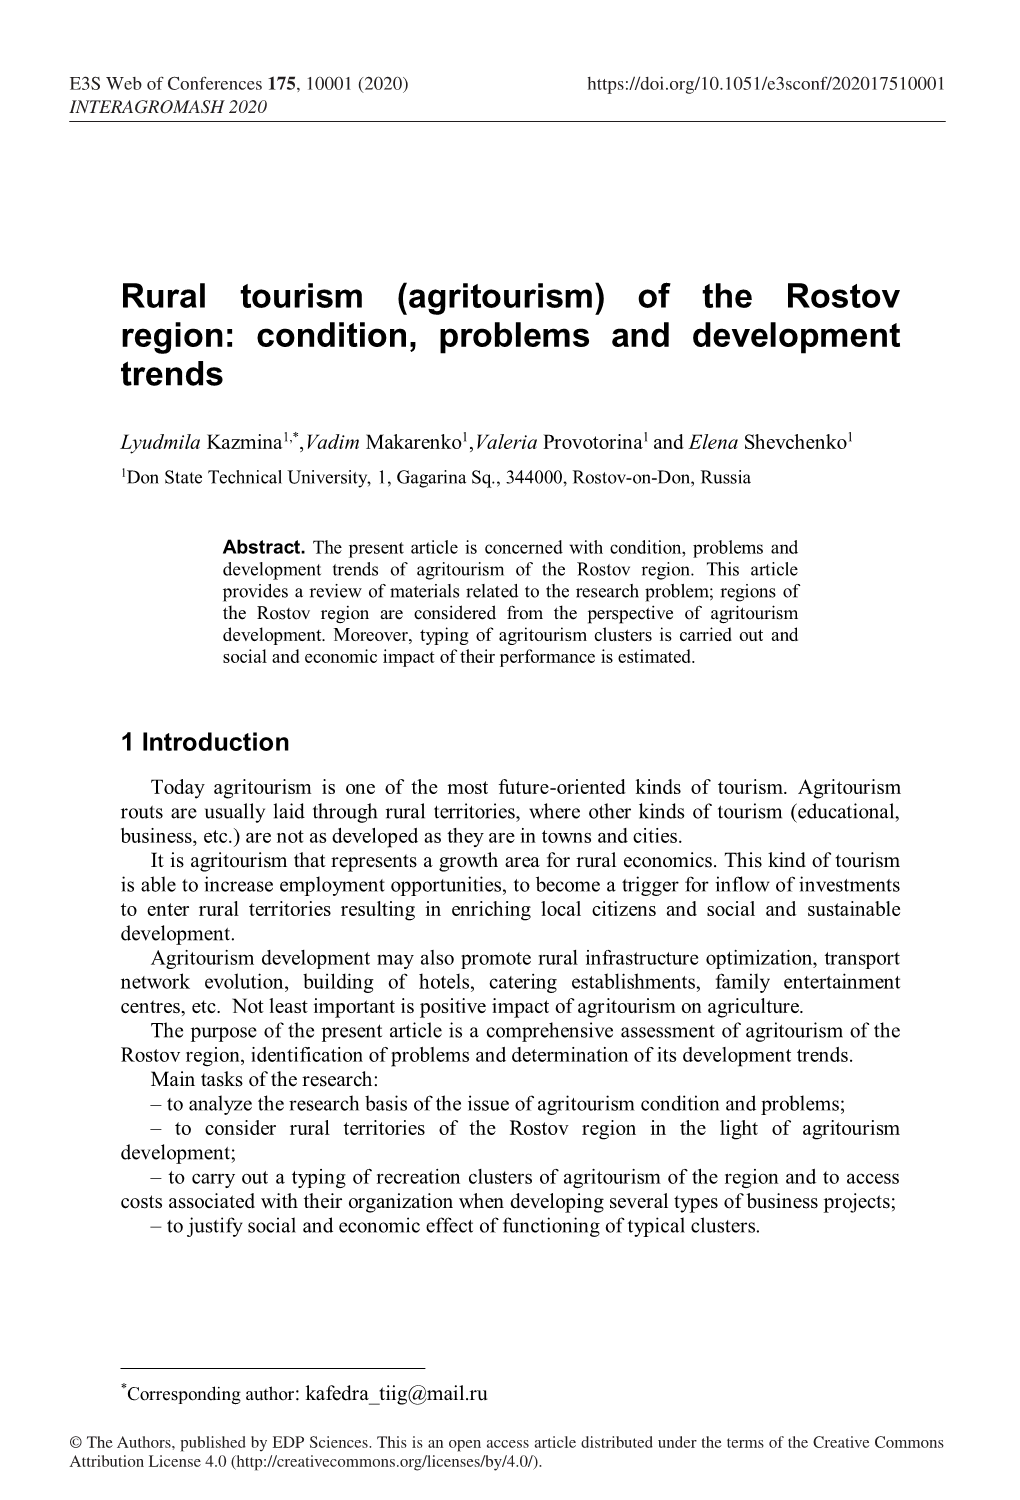 Rural Tourism (Agritourism) of the Rostov Region: Condition, Problems and Development Trends